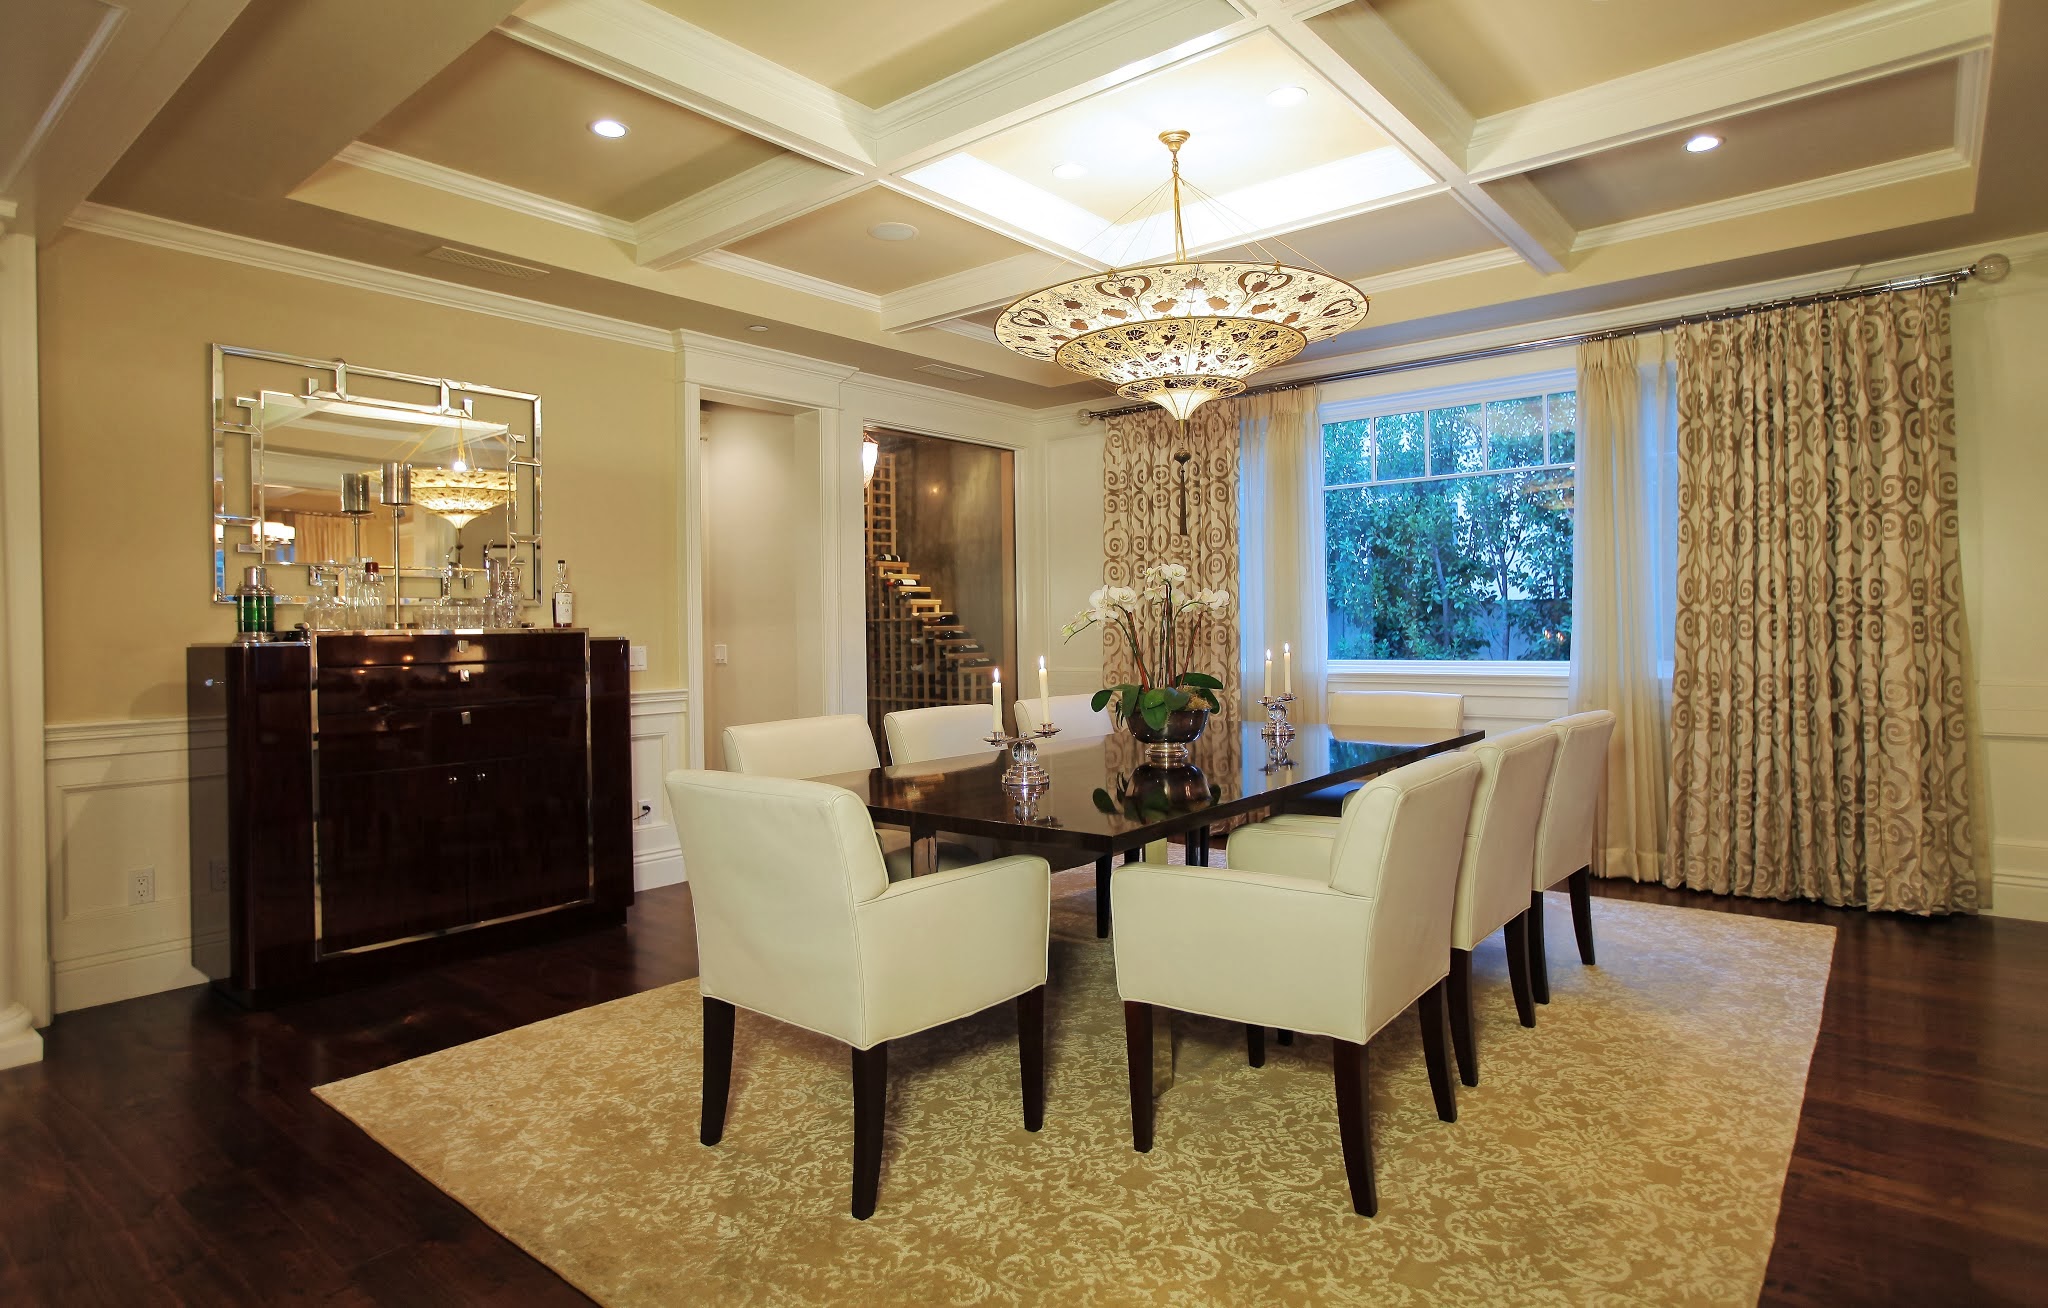 Lighting Ideas For Dining Room With Low Ceiling